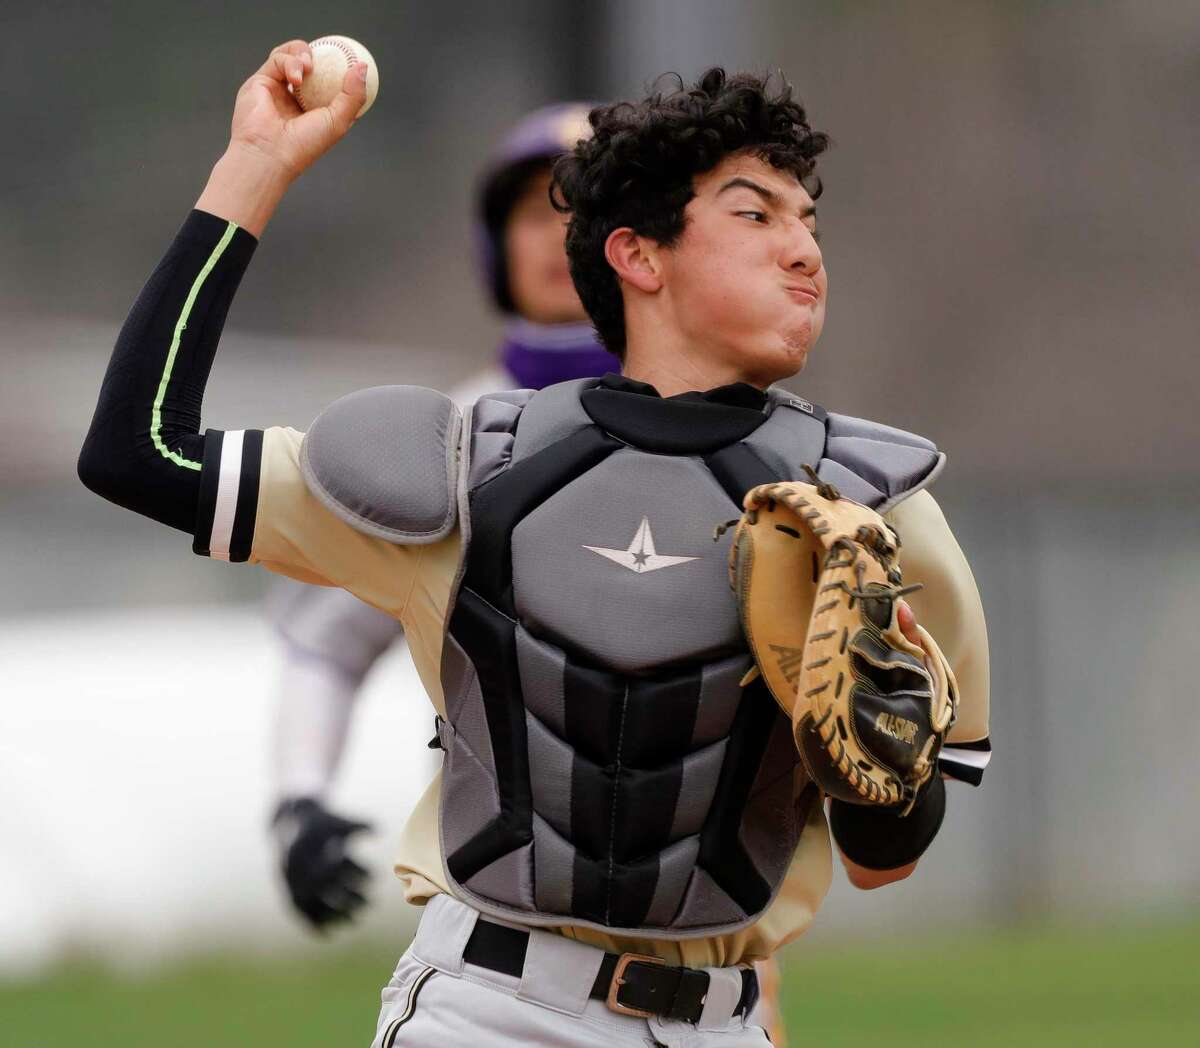 Conroe catcher Eli Medina (6) throws out Zach Marshall #4 of Jersey Village for a double play in the second inning of a game during the Ferrell Classic at Conroe High School, Friday, March 5, 2021, in Conroe.